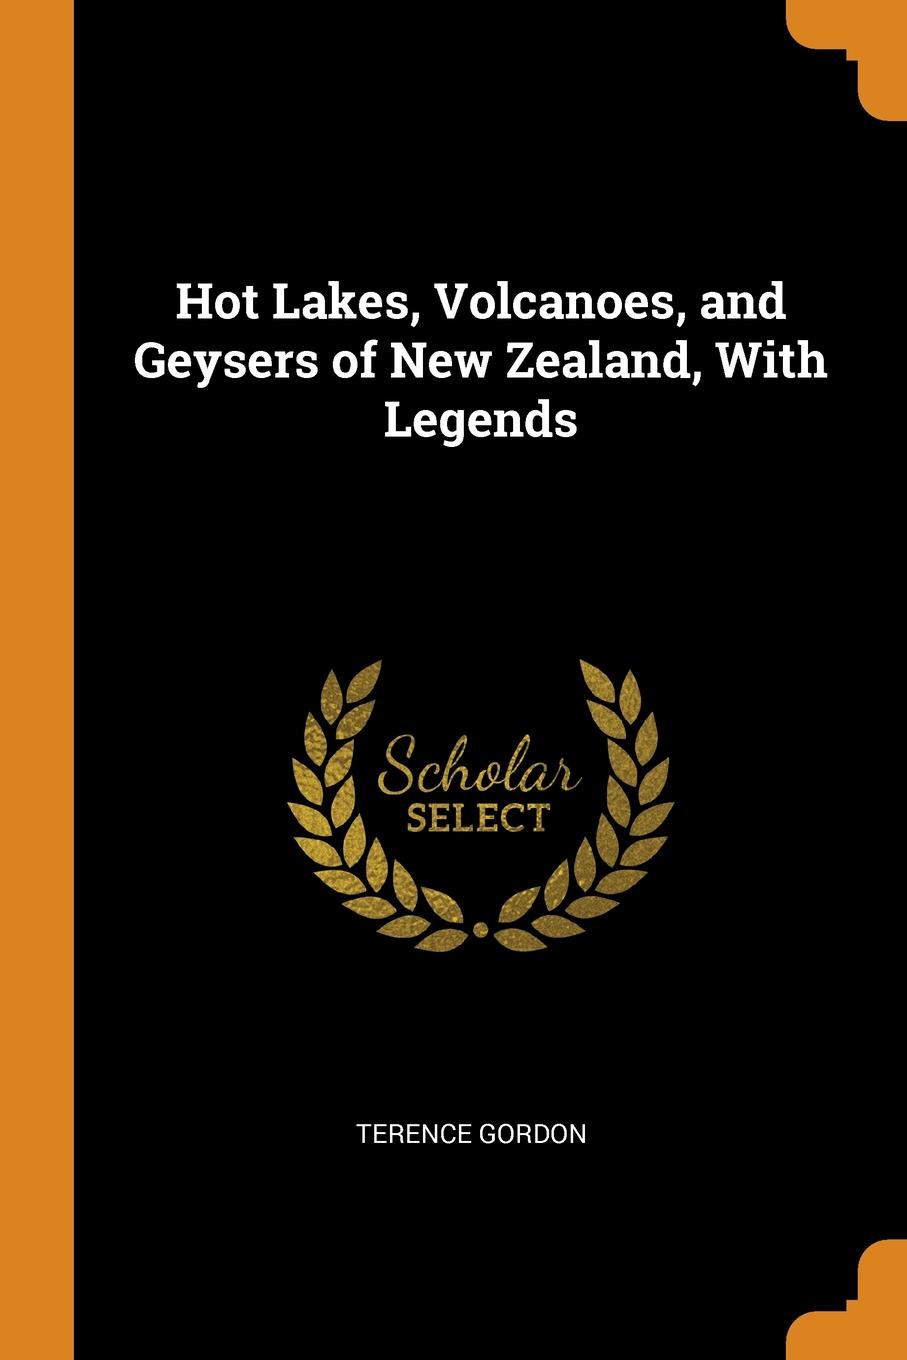 Hot Lakes, Volcanoes, and Geysers of New Zealand, With Legends